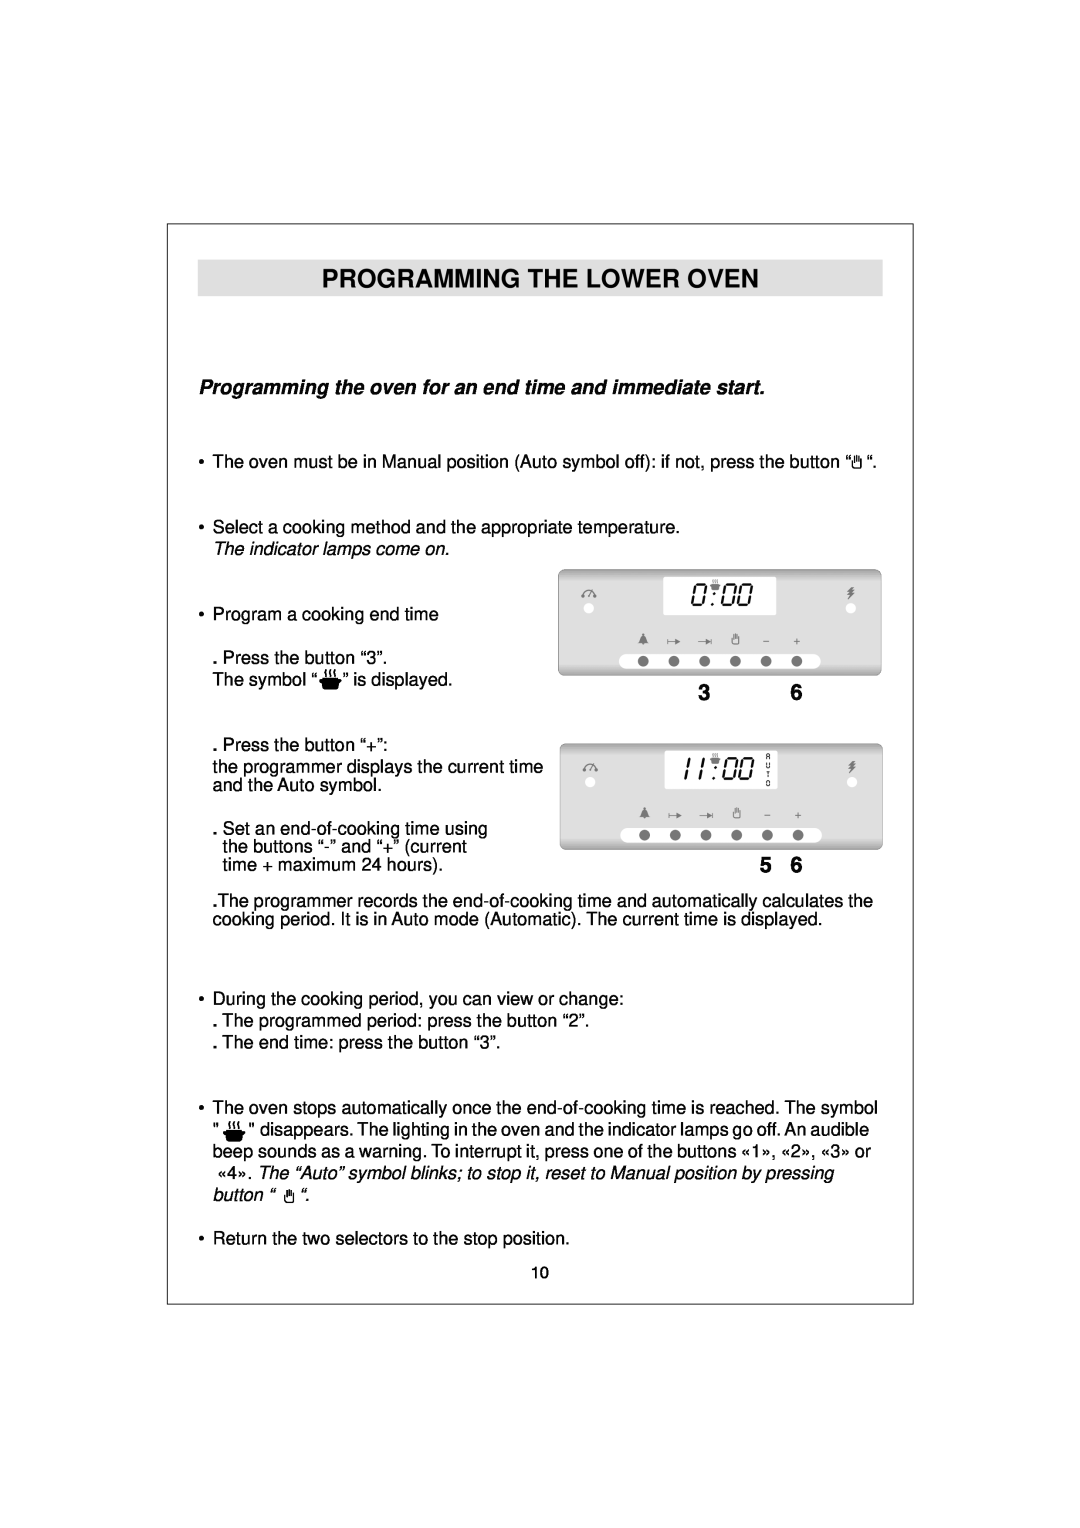 Hoover HDO 889, HDO 885 manual Programming the oven for an end time and immediate start, Programming The Lower Oven 